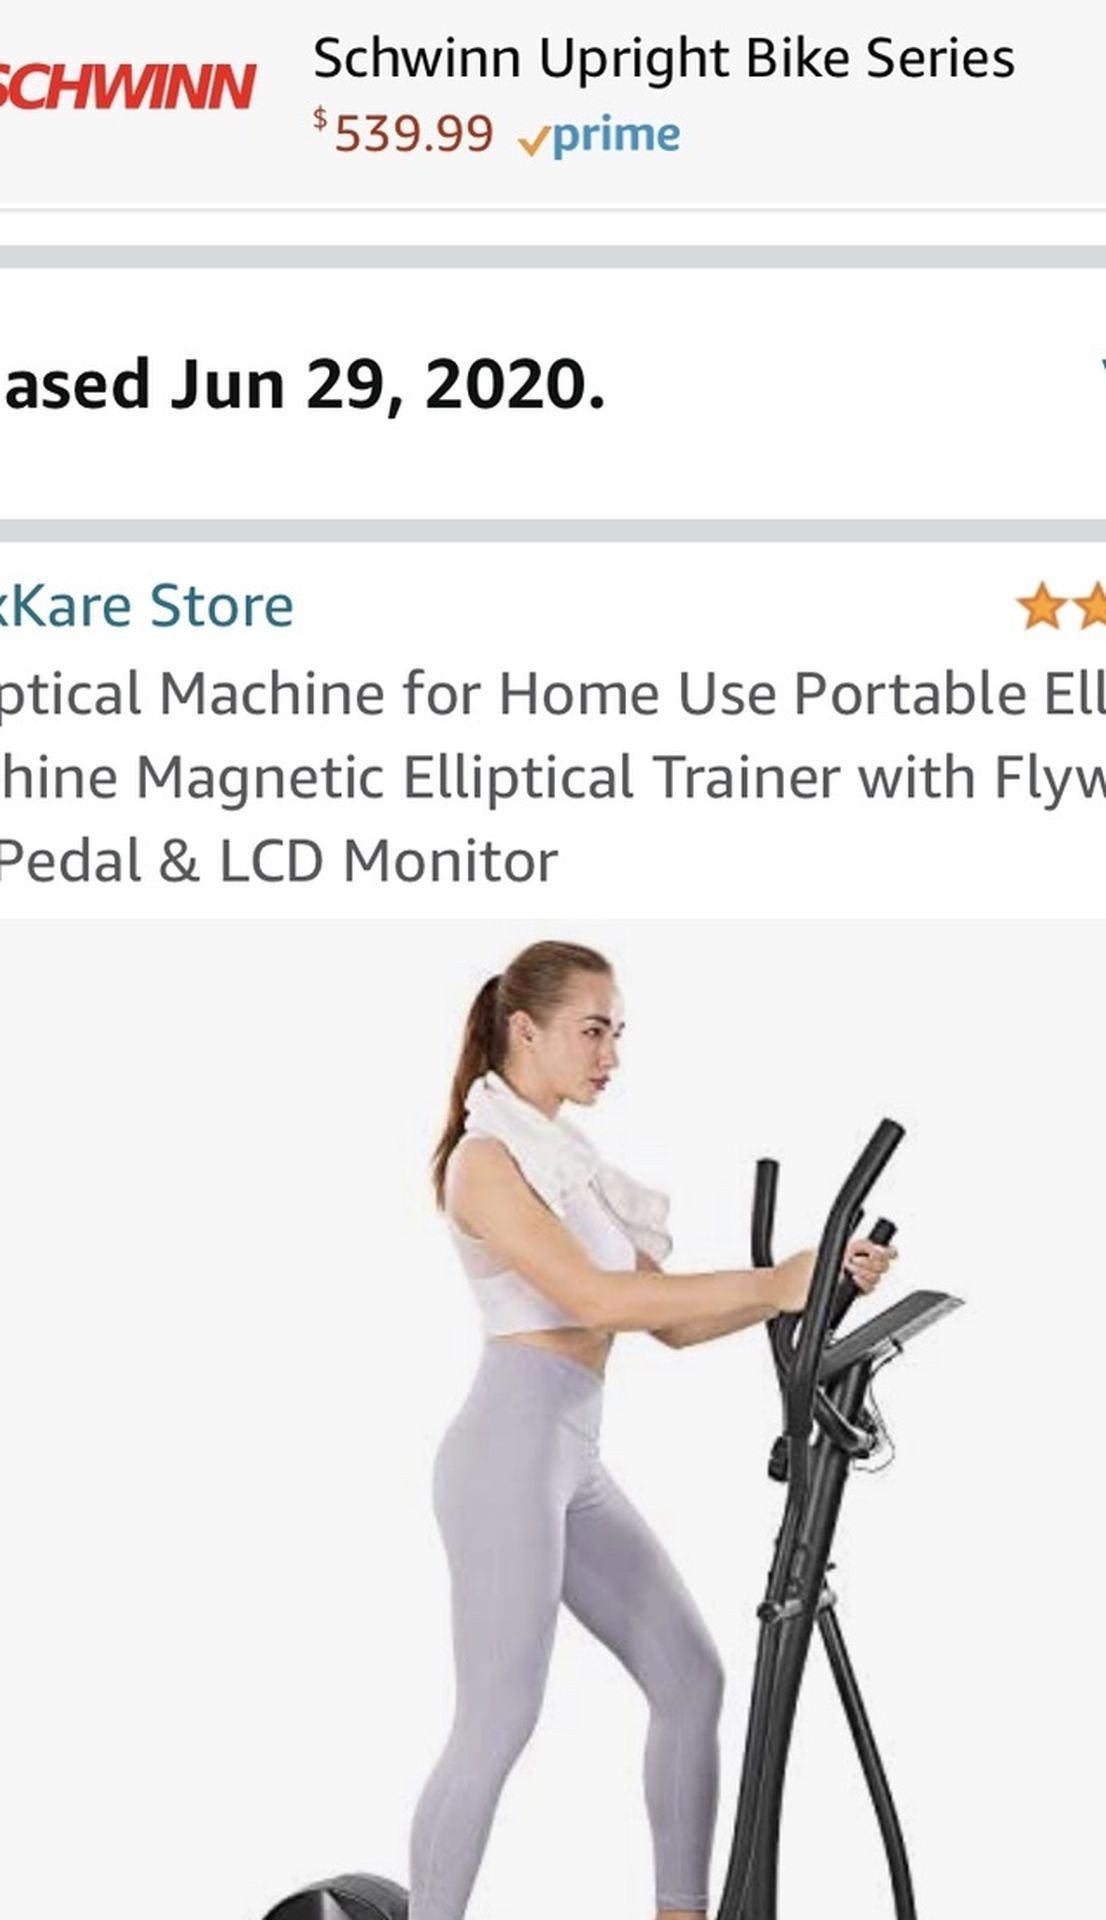 MaxKare Eliptical Machine for Home Use!